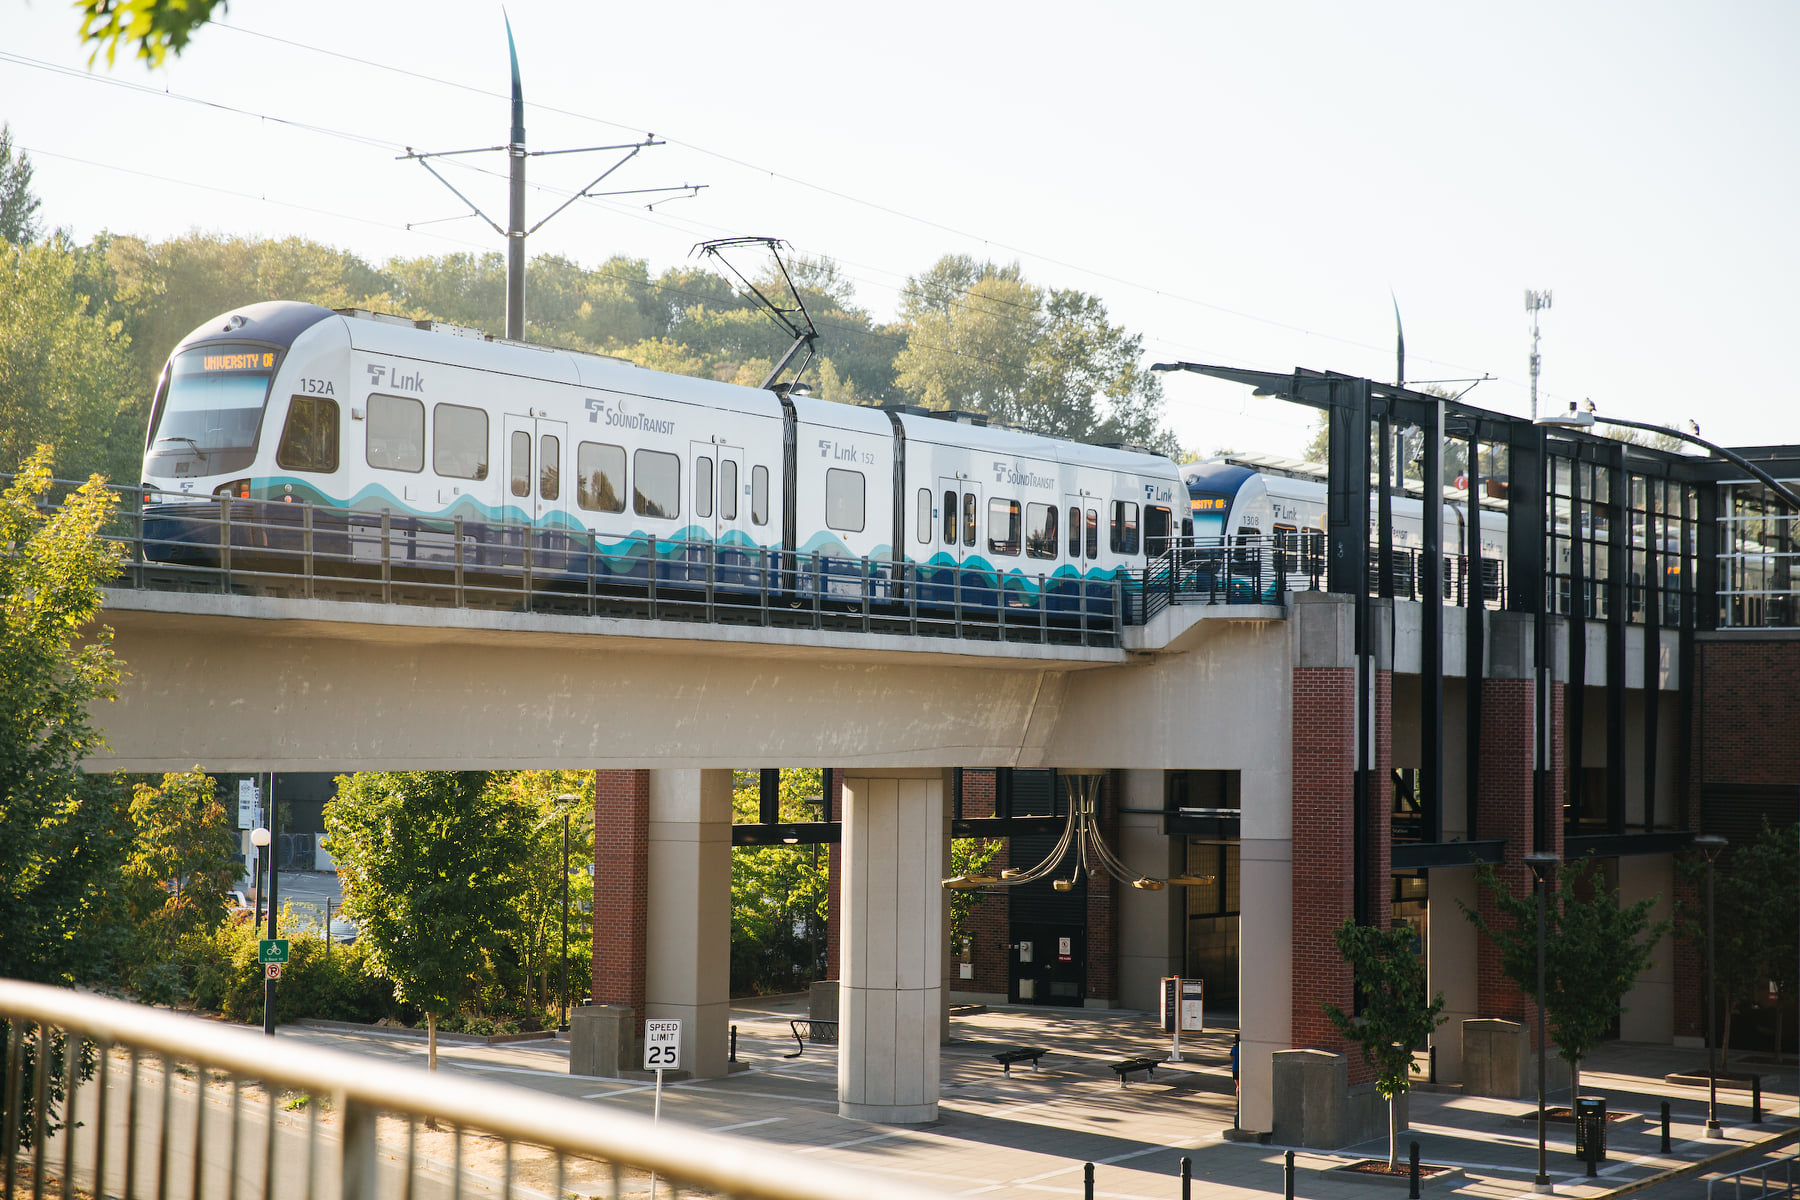 Photo showing a Link light rail train leaving an existing light rail station. The station is elevated from the ground level, and the rail line runs above street level. The photo shows an example of what an elevated station, like the one that will be built at Mariner, could look like.